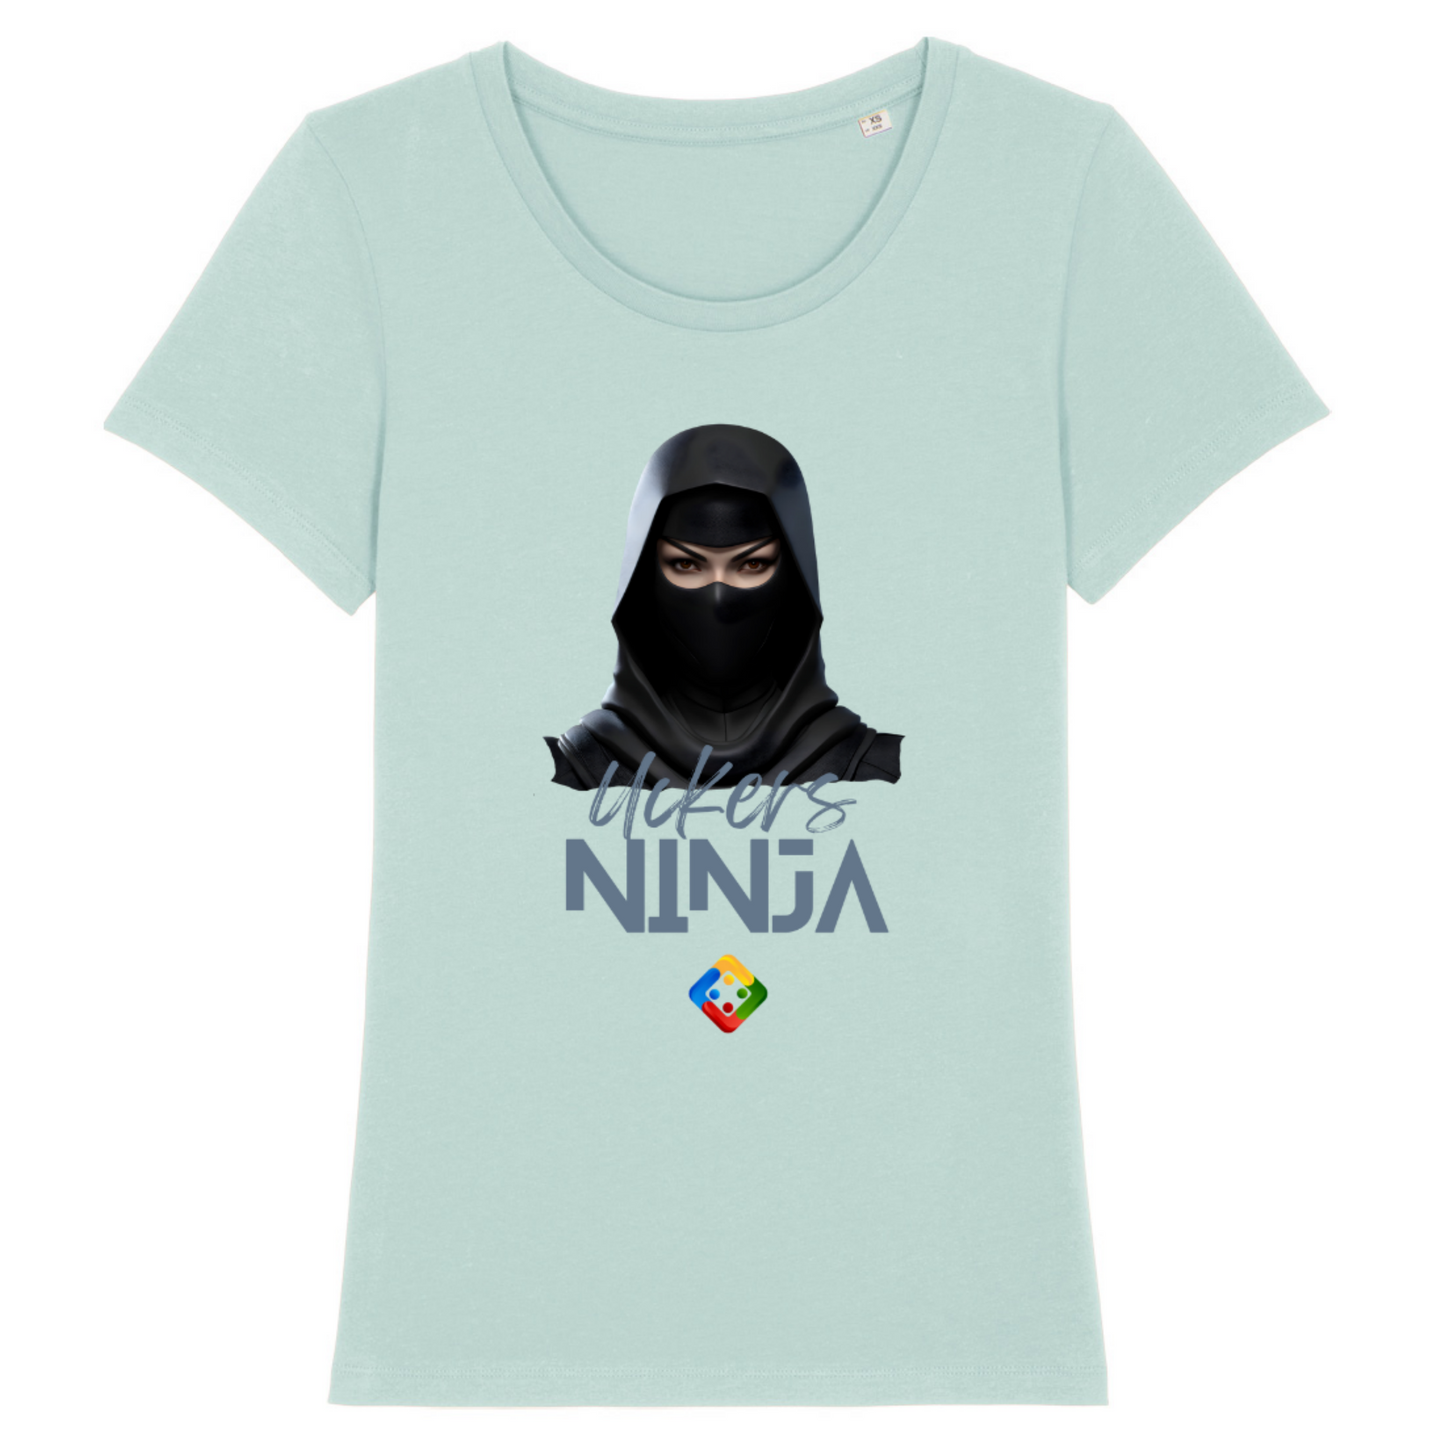 Women's organic T-shirt with printed 'Uckers Ninja' design. Available in 14 colours.